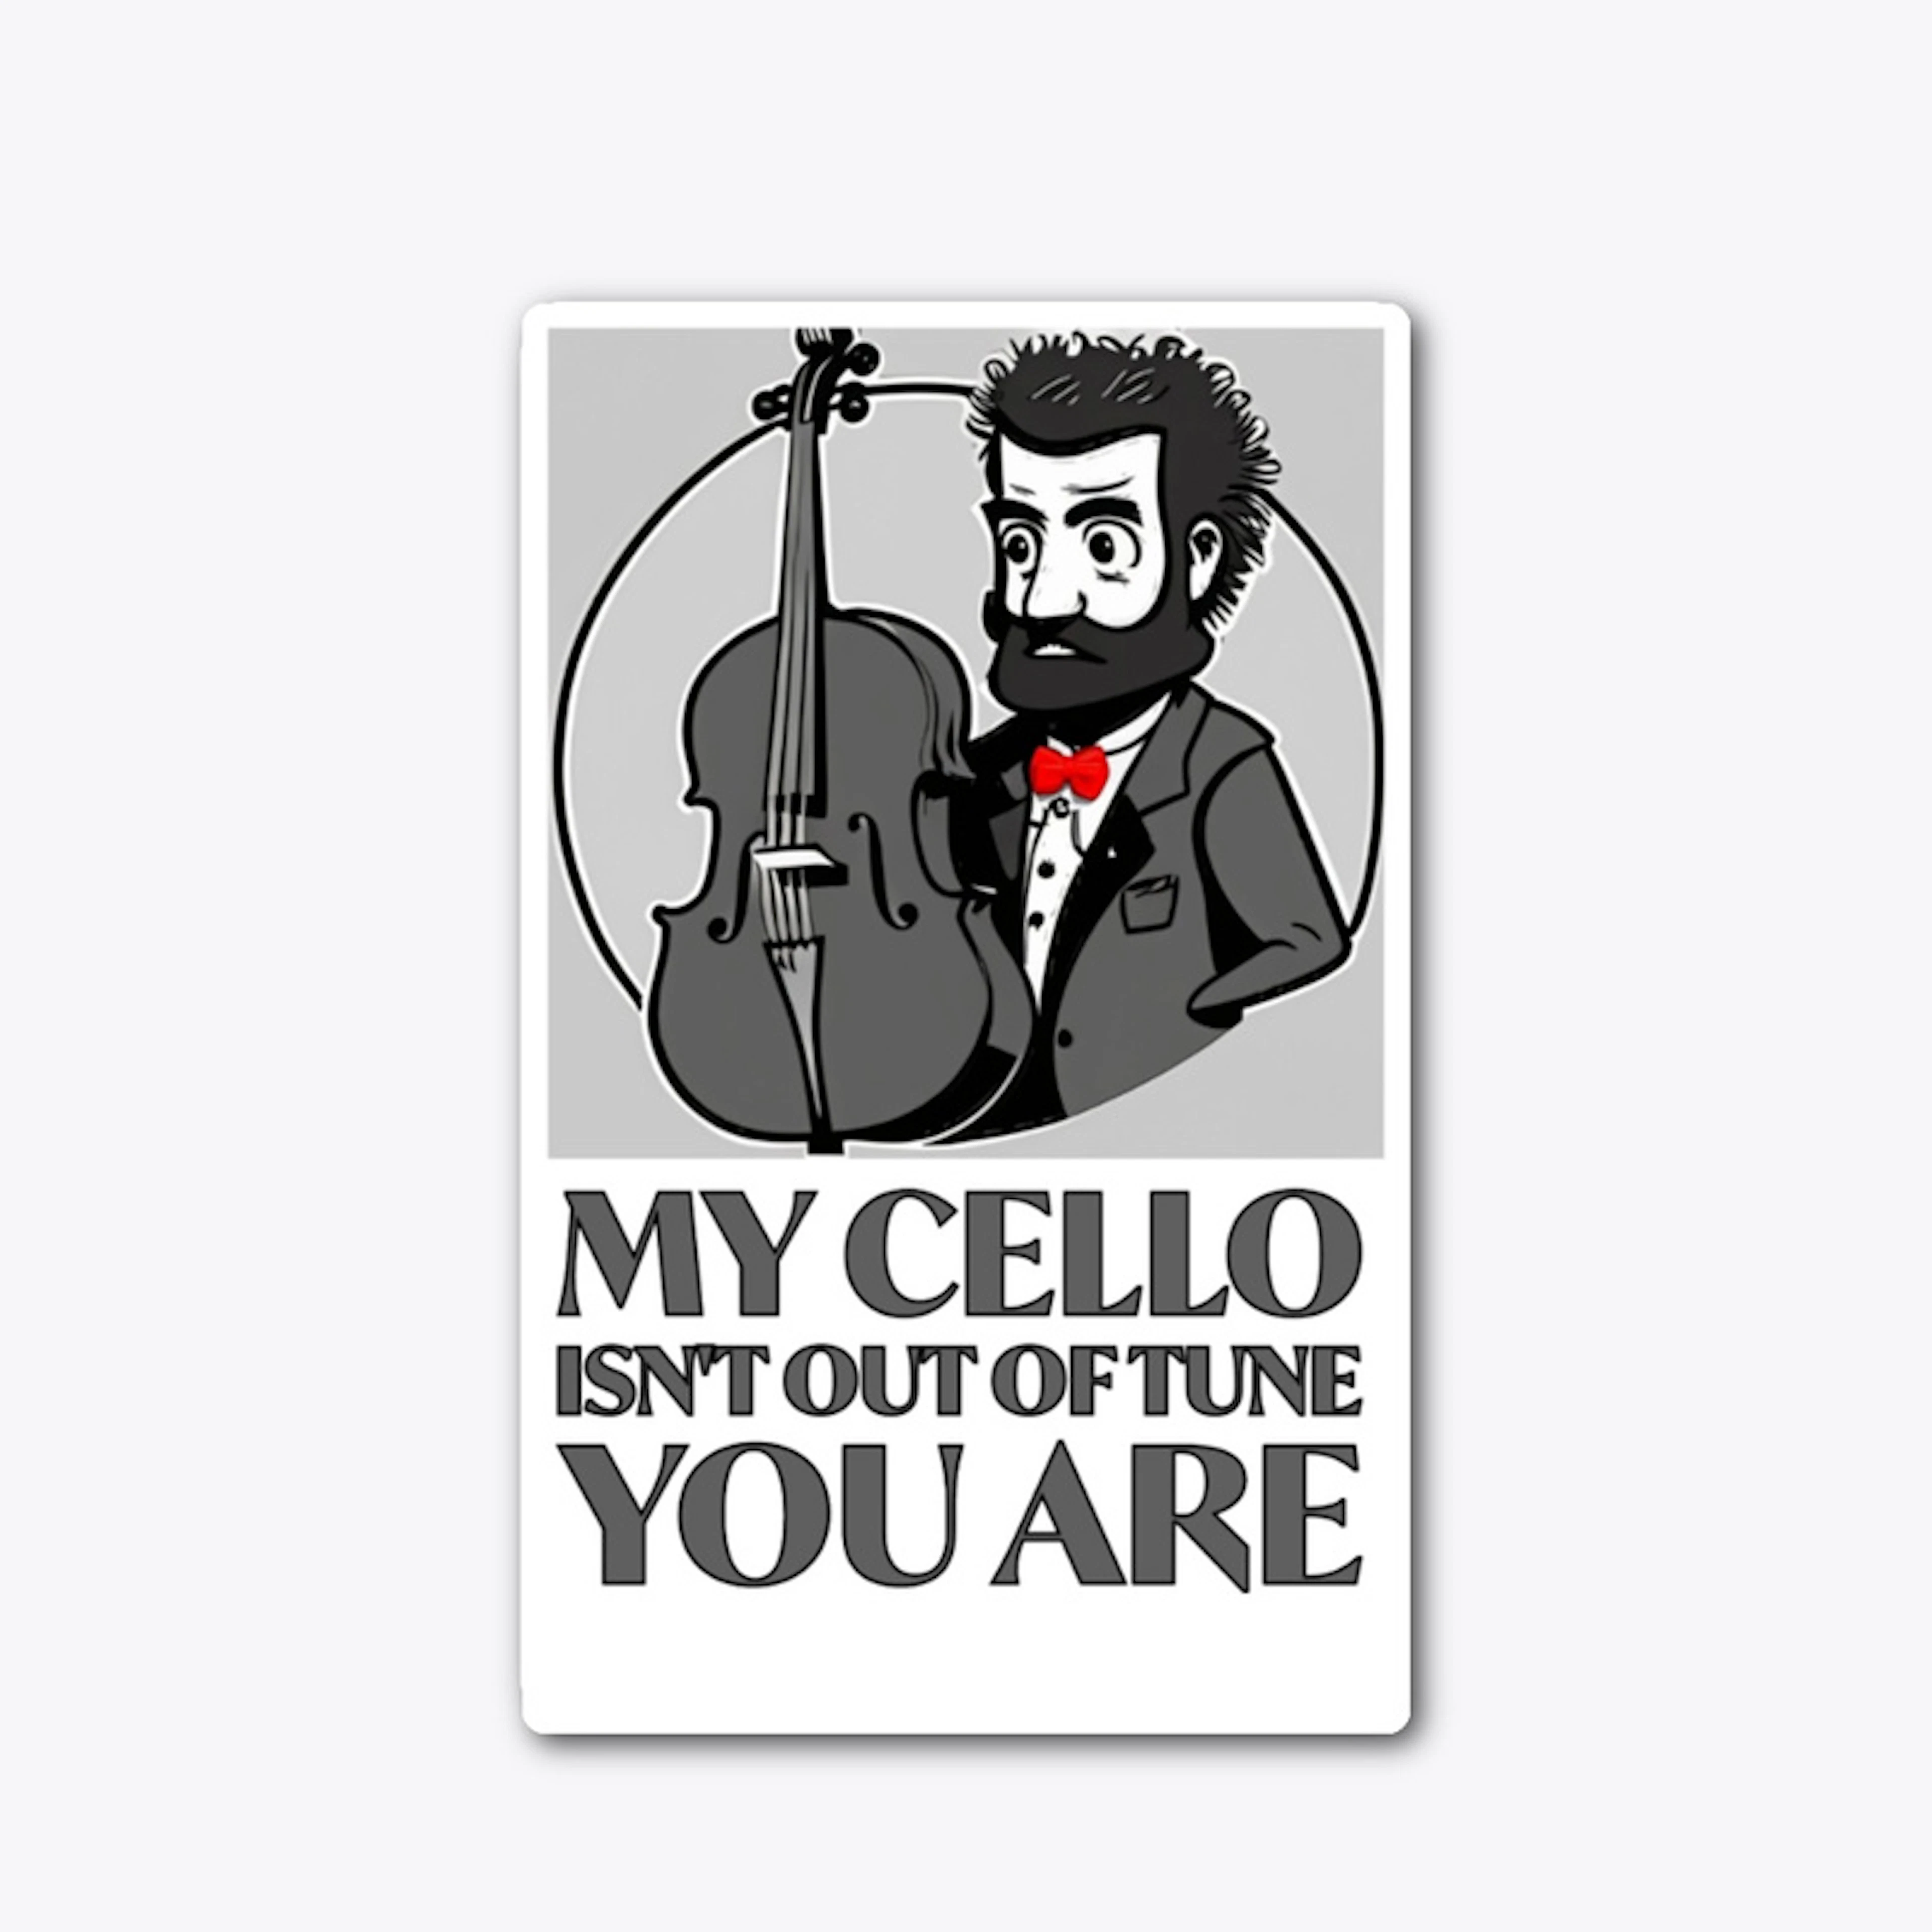 My Cello Isn't Out of Tune, You Are